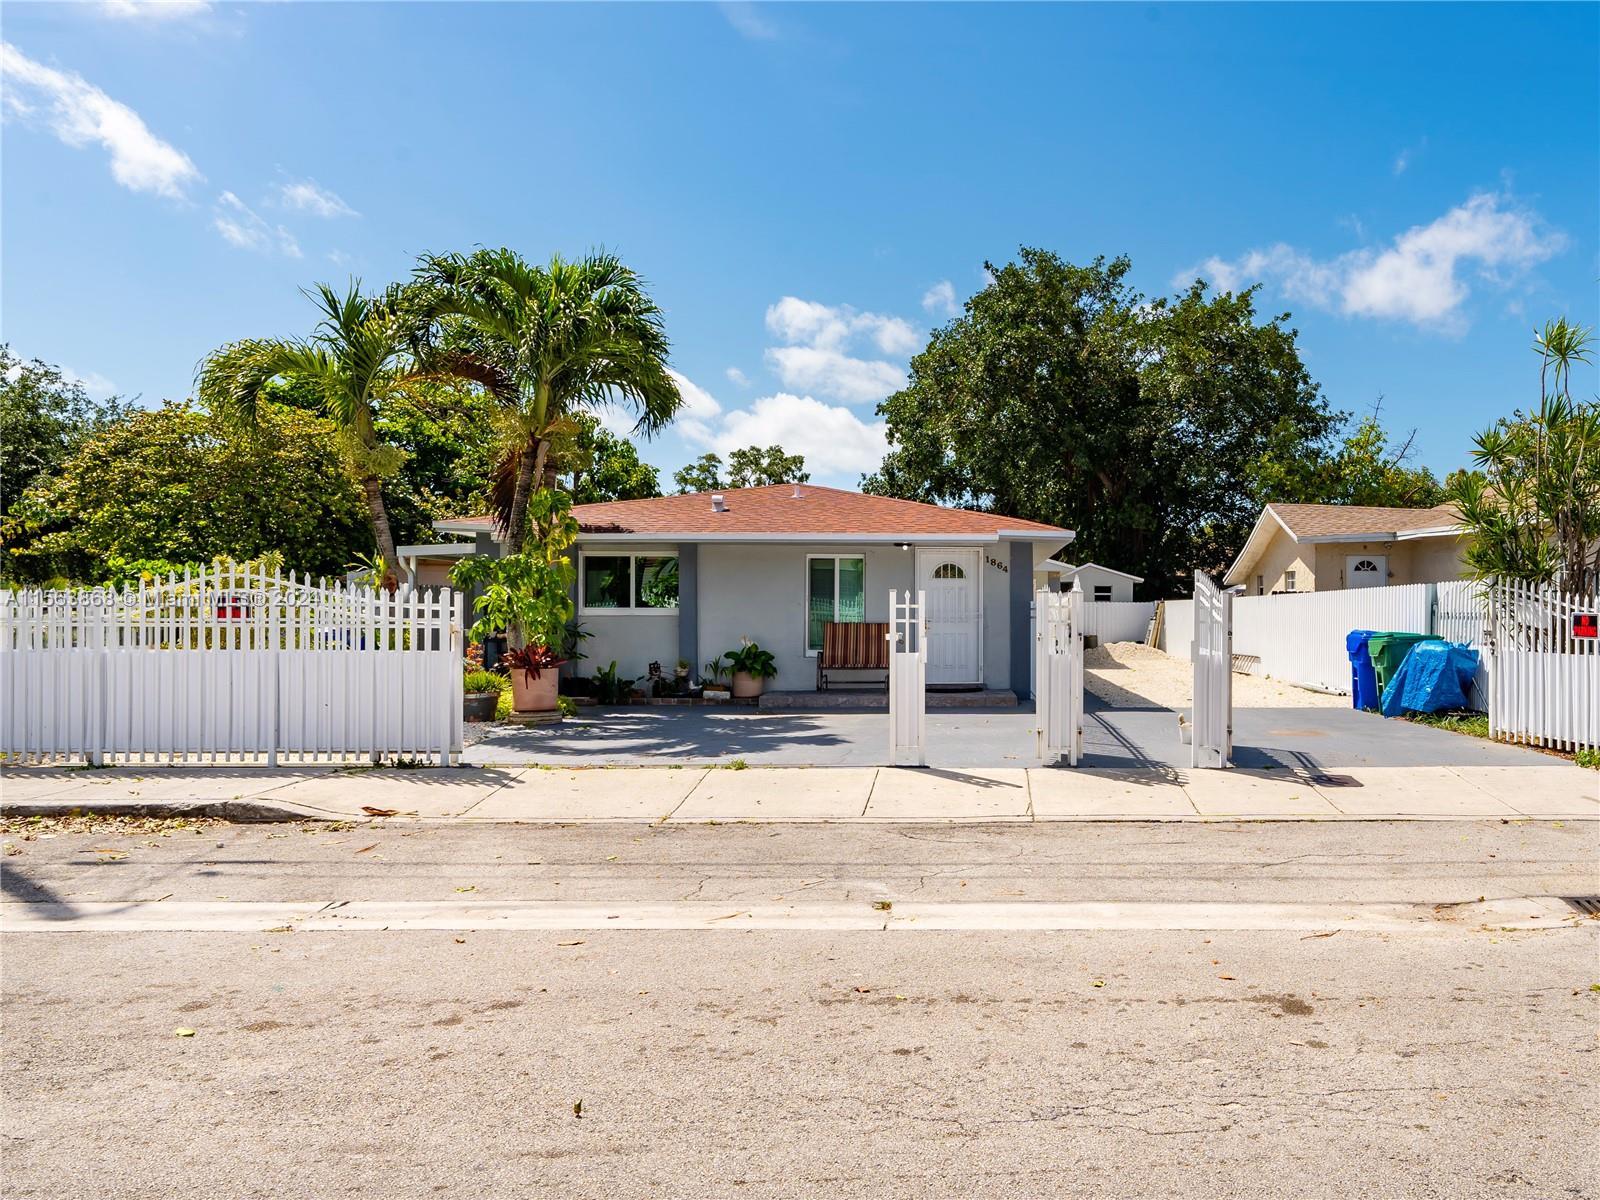 Photo of 1864 NW 27th St in Miami, FL